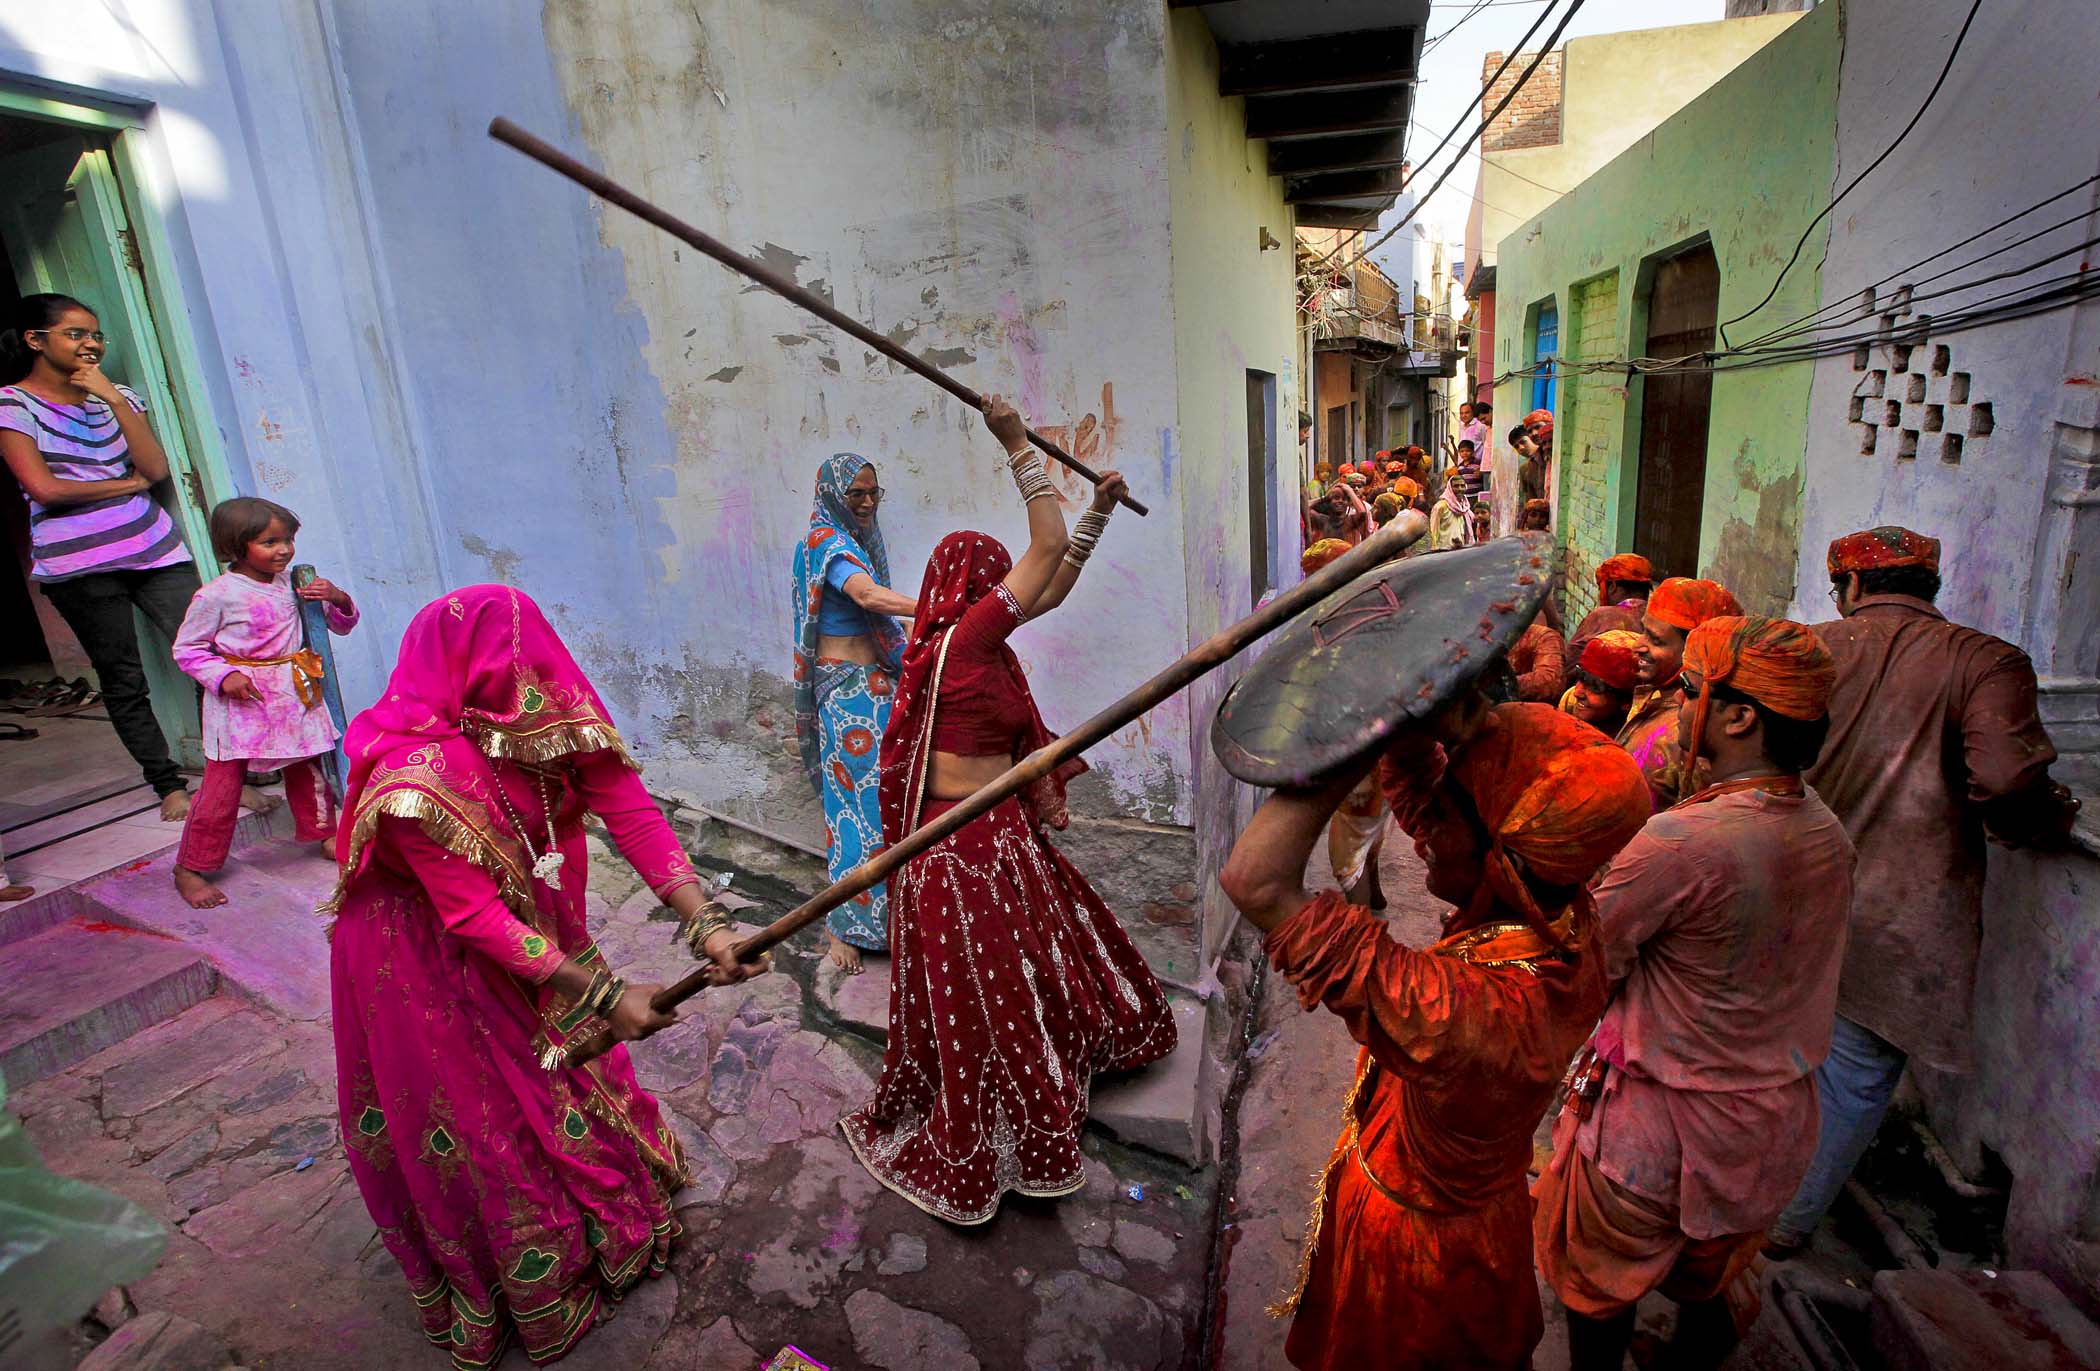 Women from the village of Barsana hit villagers from Nandgaon with wooden sticks during the Lathmar Holi festival. (Manish Swarup/Associated Press)